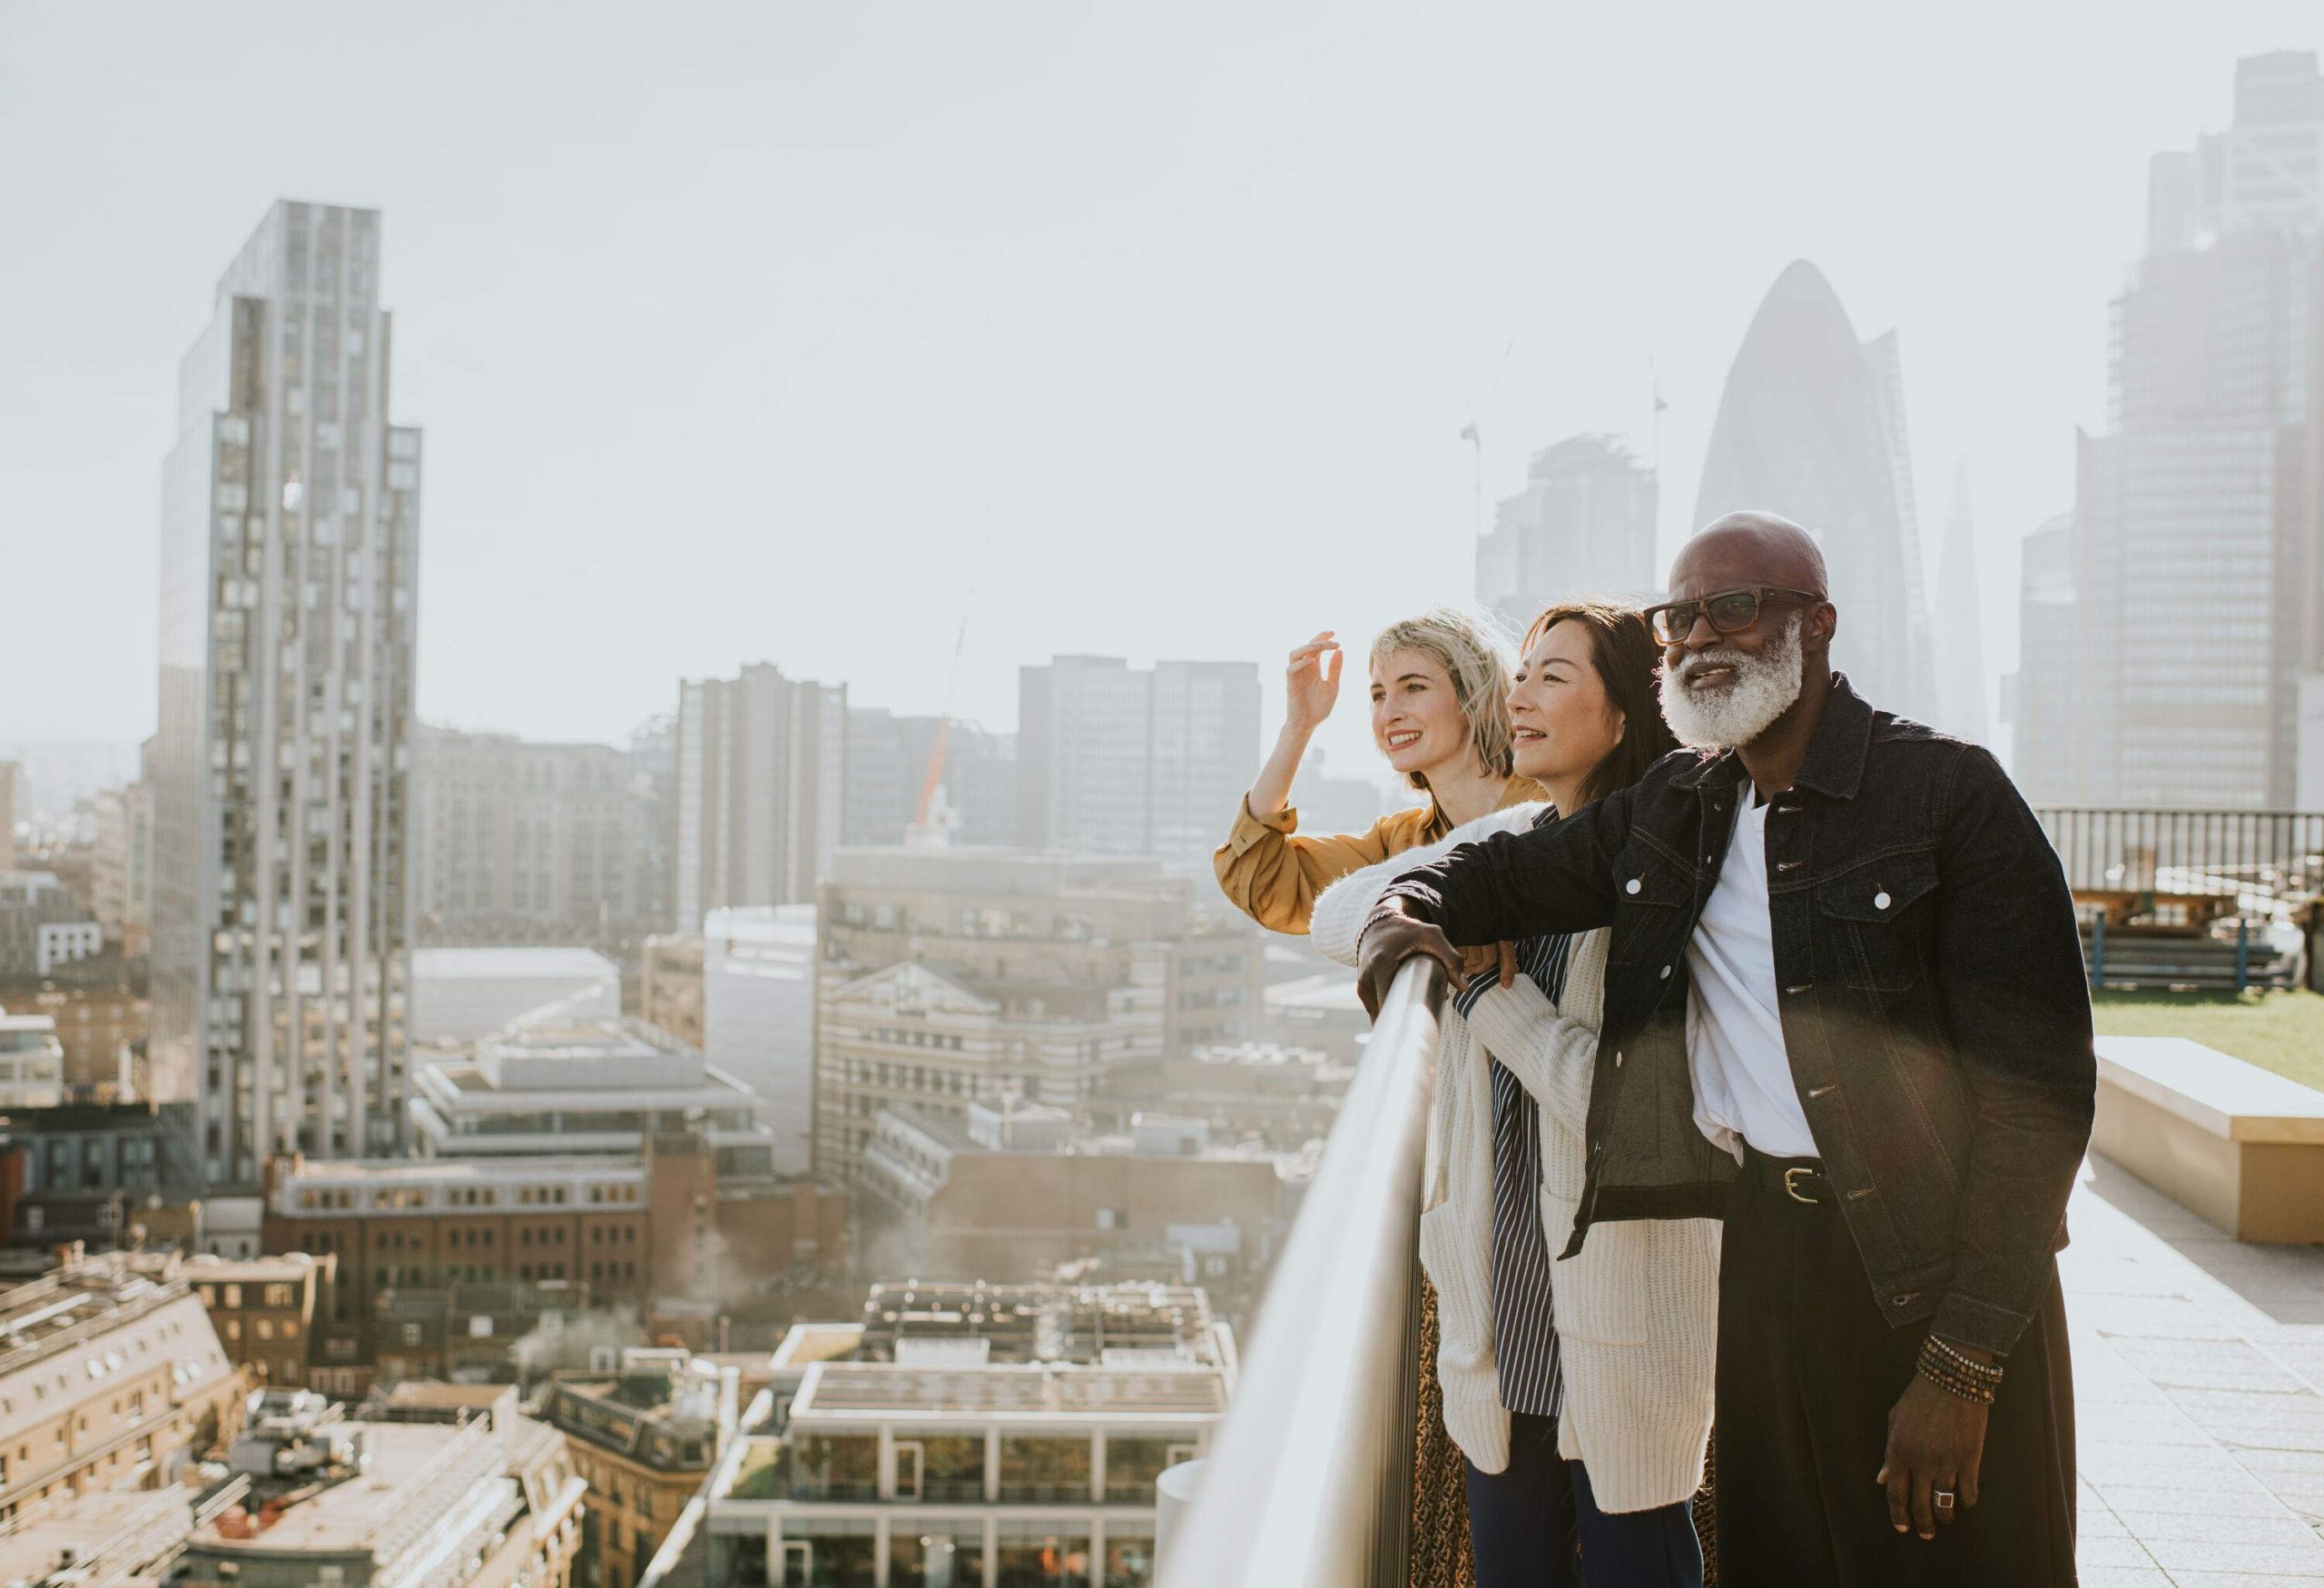 Three people stand on a rooftop / balcony and look out at an epic, sunny cityscape. They admire the view, smiling and pointing and discussing the sights.